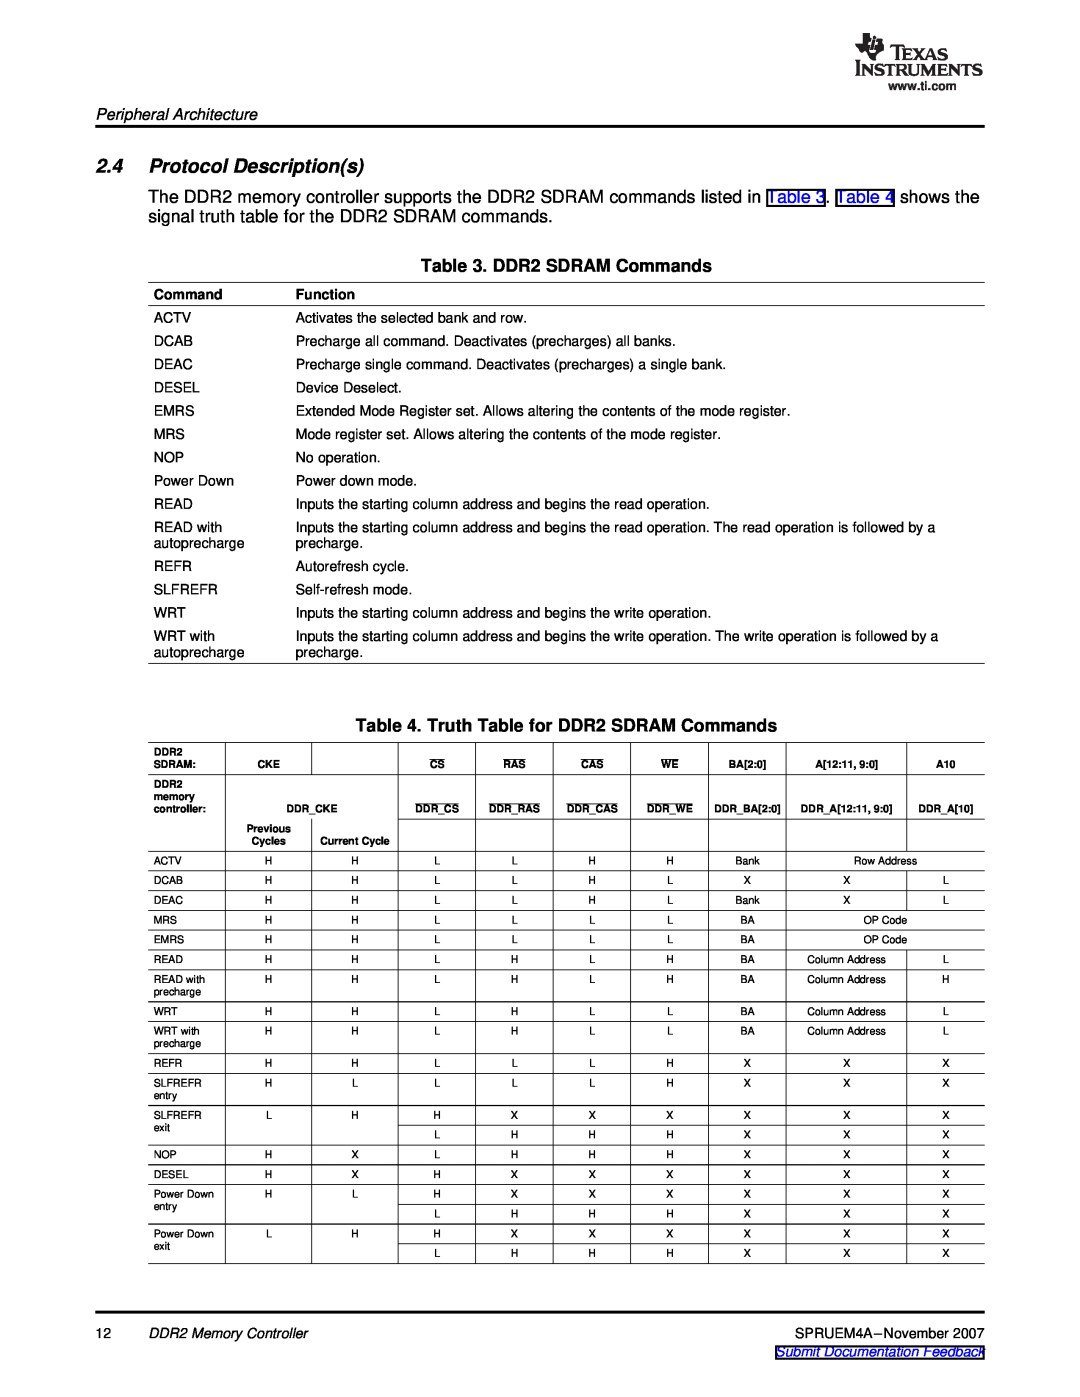 Texas Instruments TMS320C642x DSP Protocol Descriptions, Truth Table for DDR2 SDRAM Commands, Peripheral Architecture 